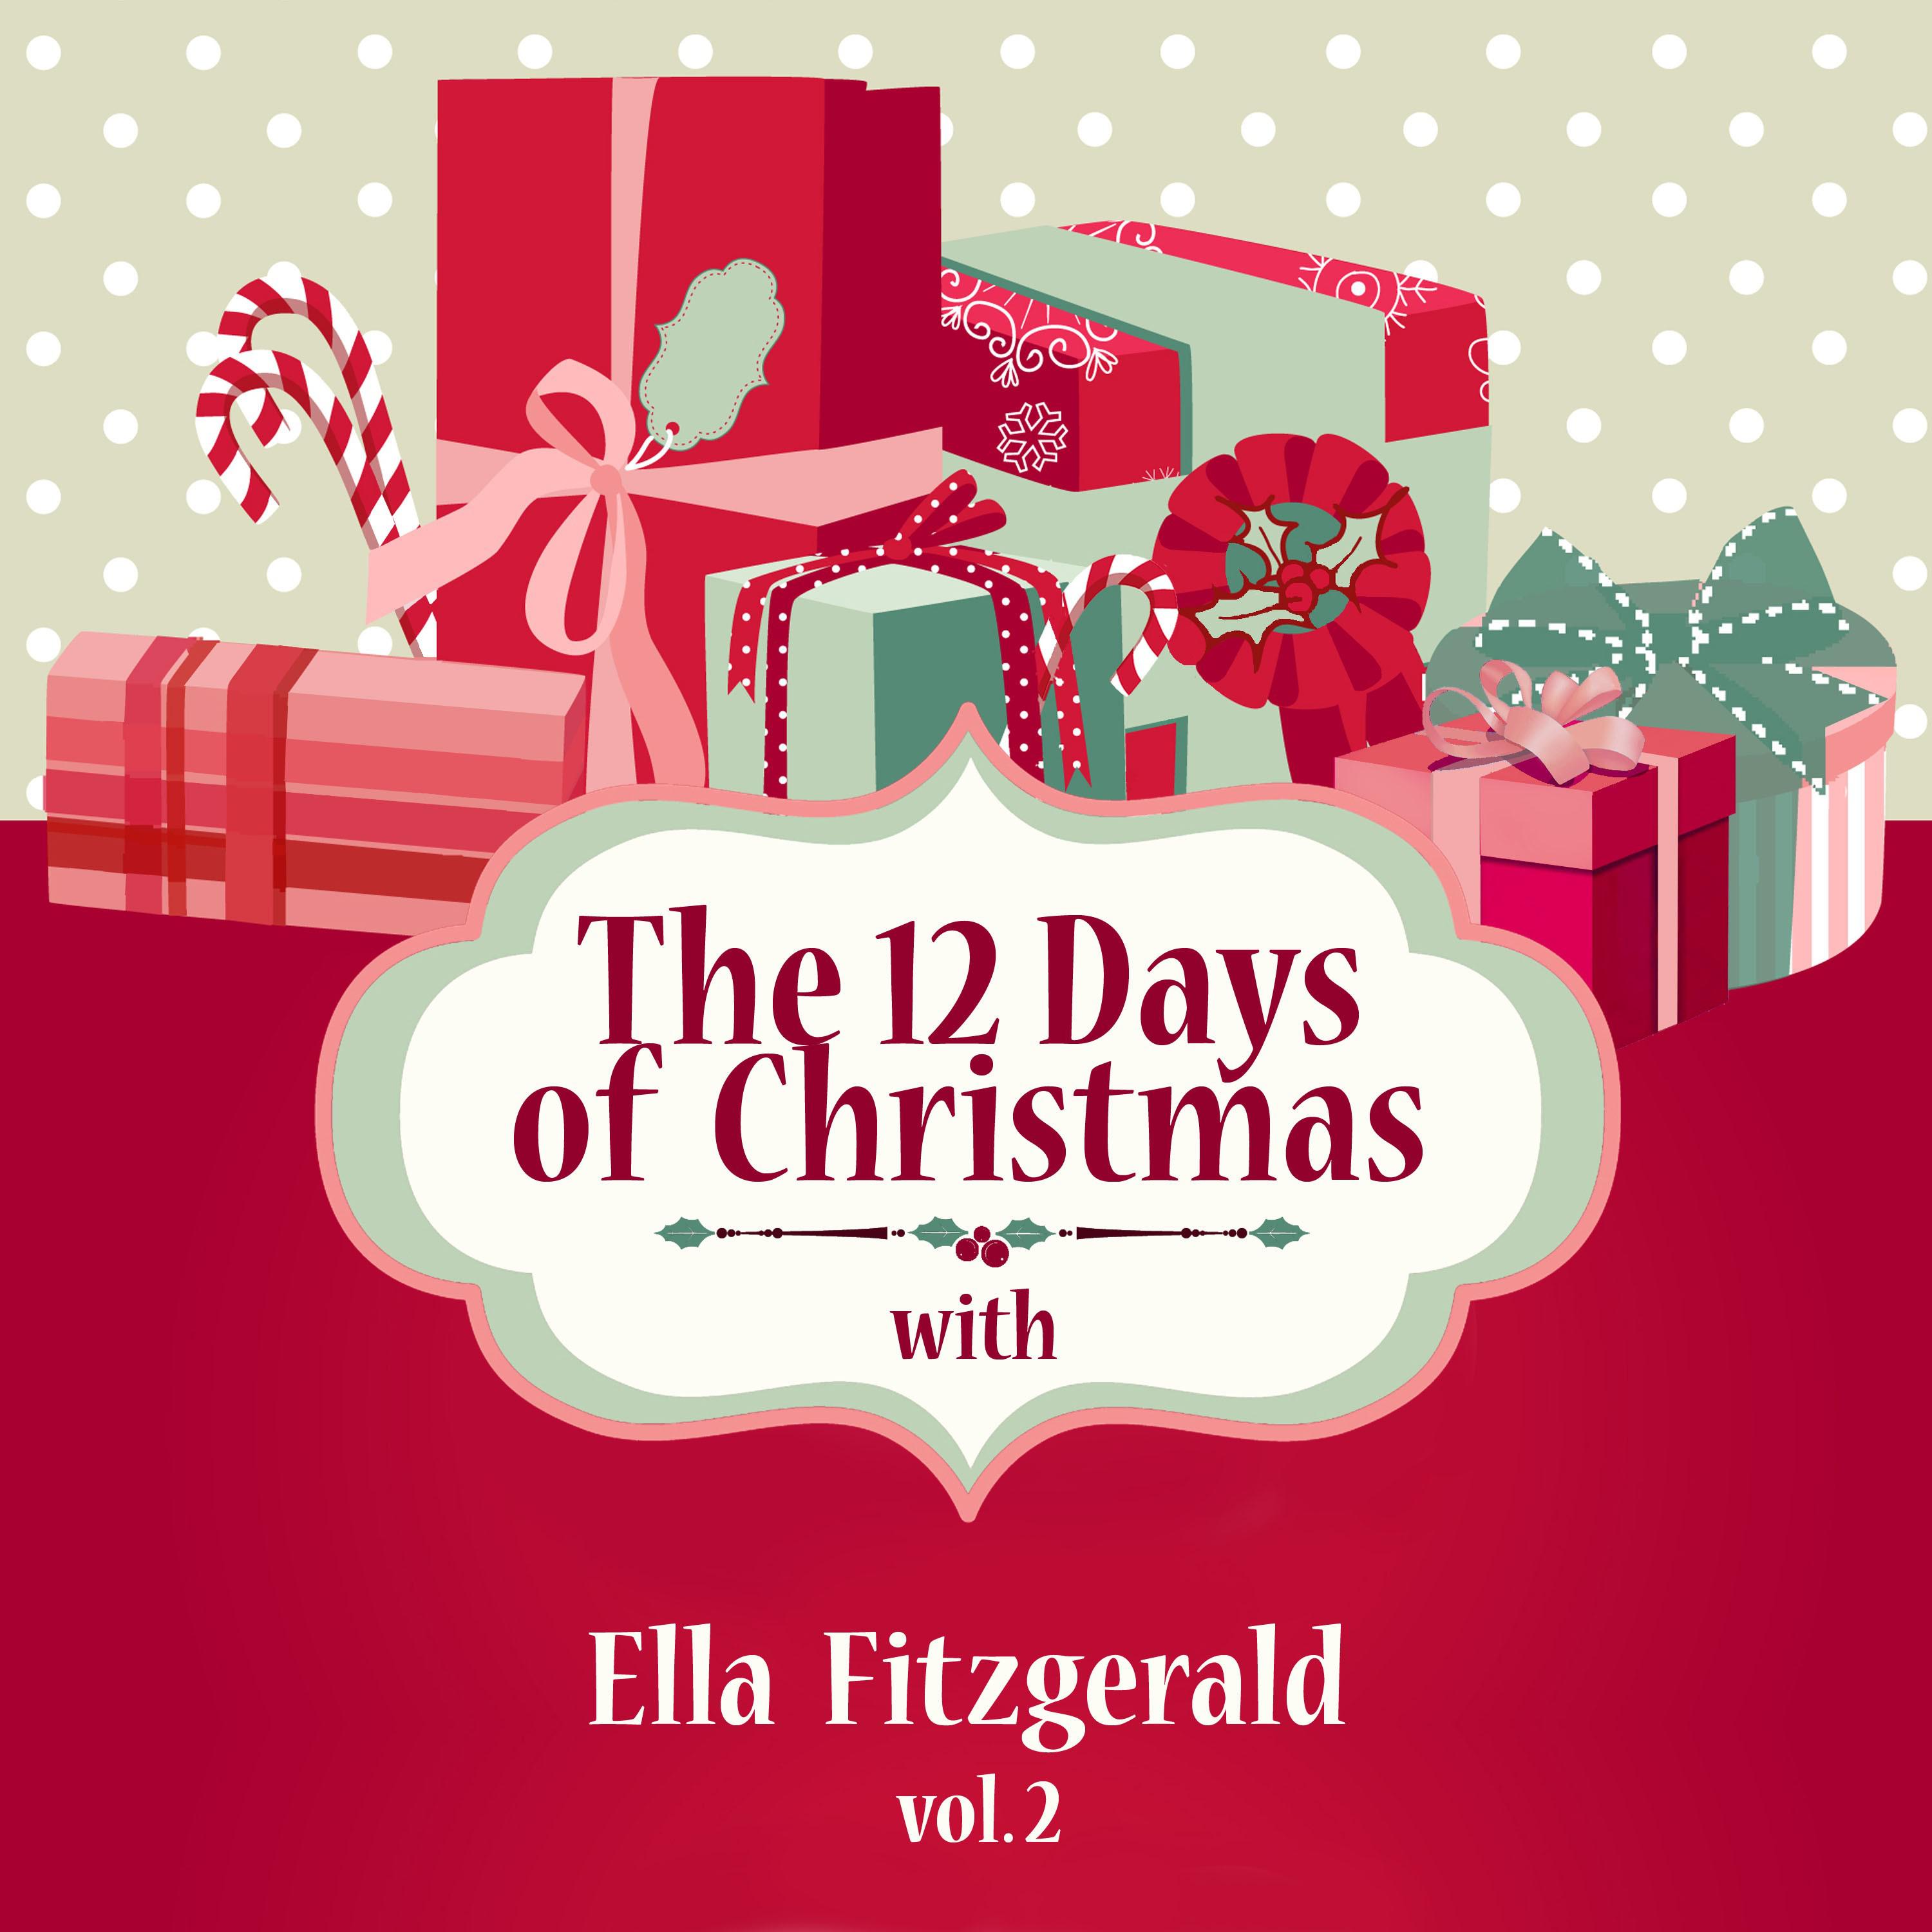 The 12 Days of Christmas with Ella Fitzgerald, Vol. 2